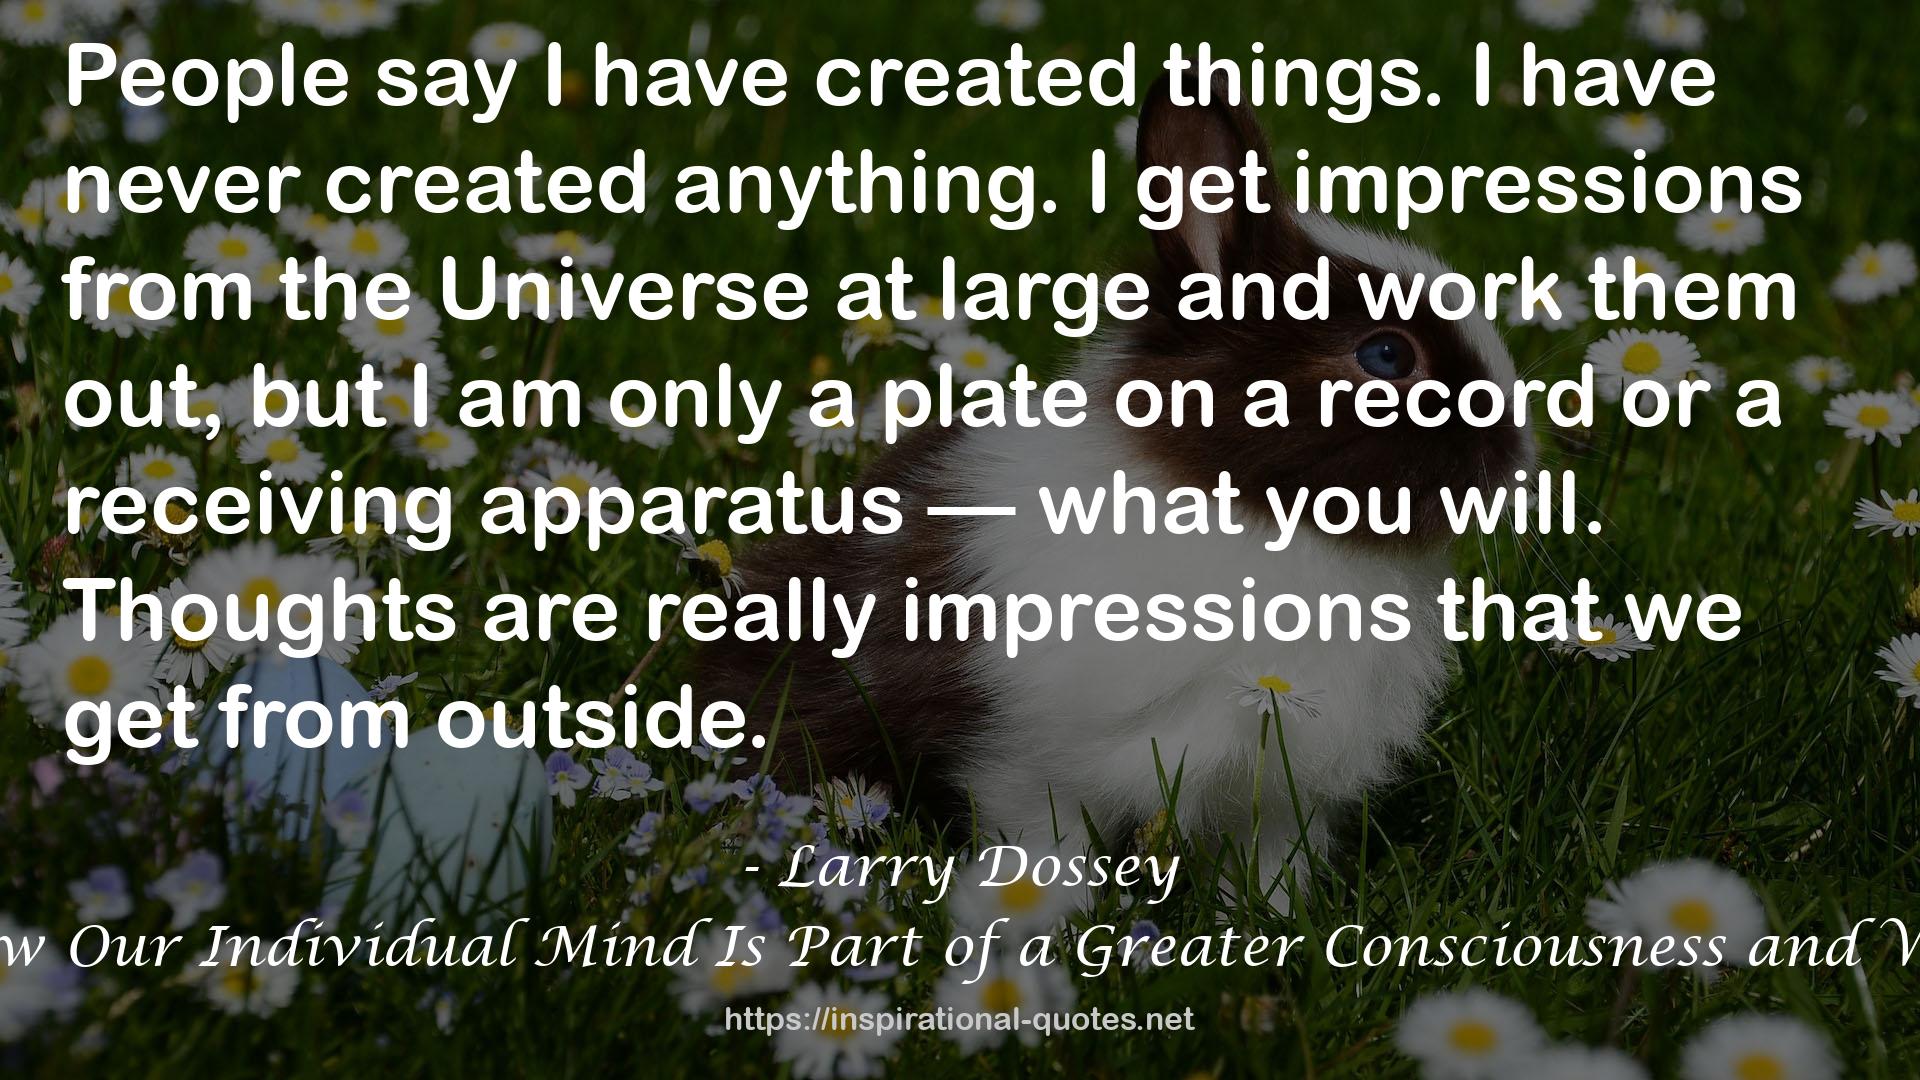 One Mind: How Our Individual Mind Is Part of a Greater Consciousness and Why It Matters QUOTES